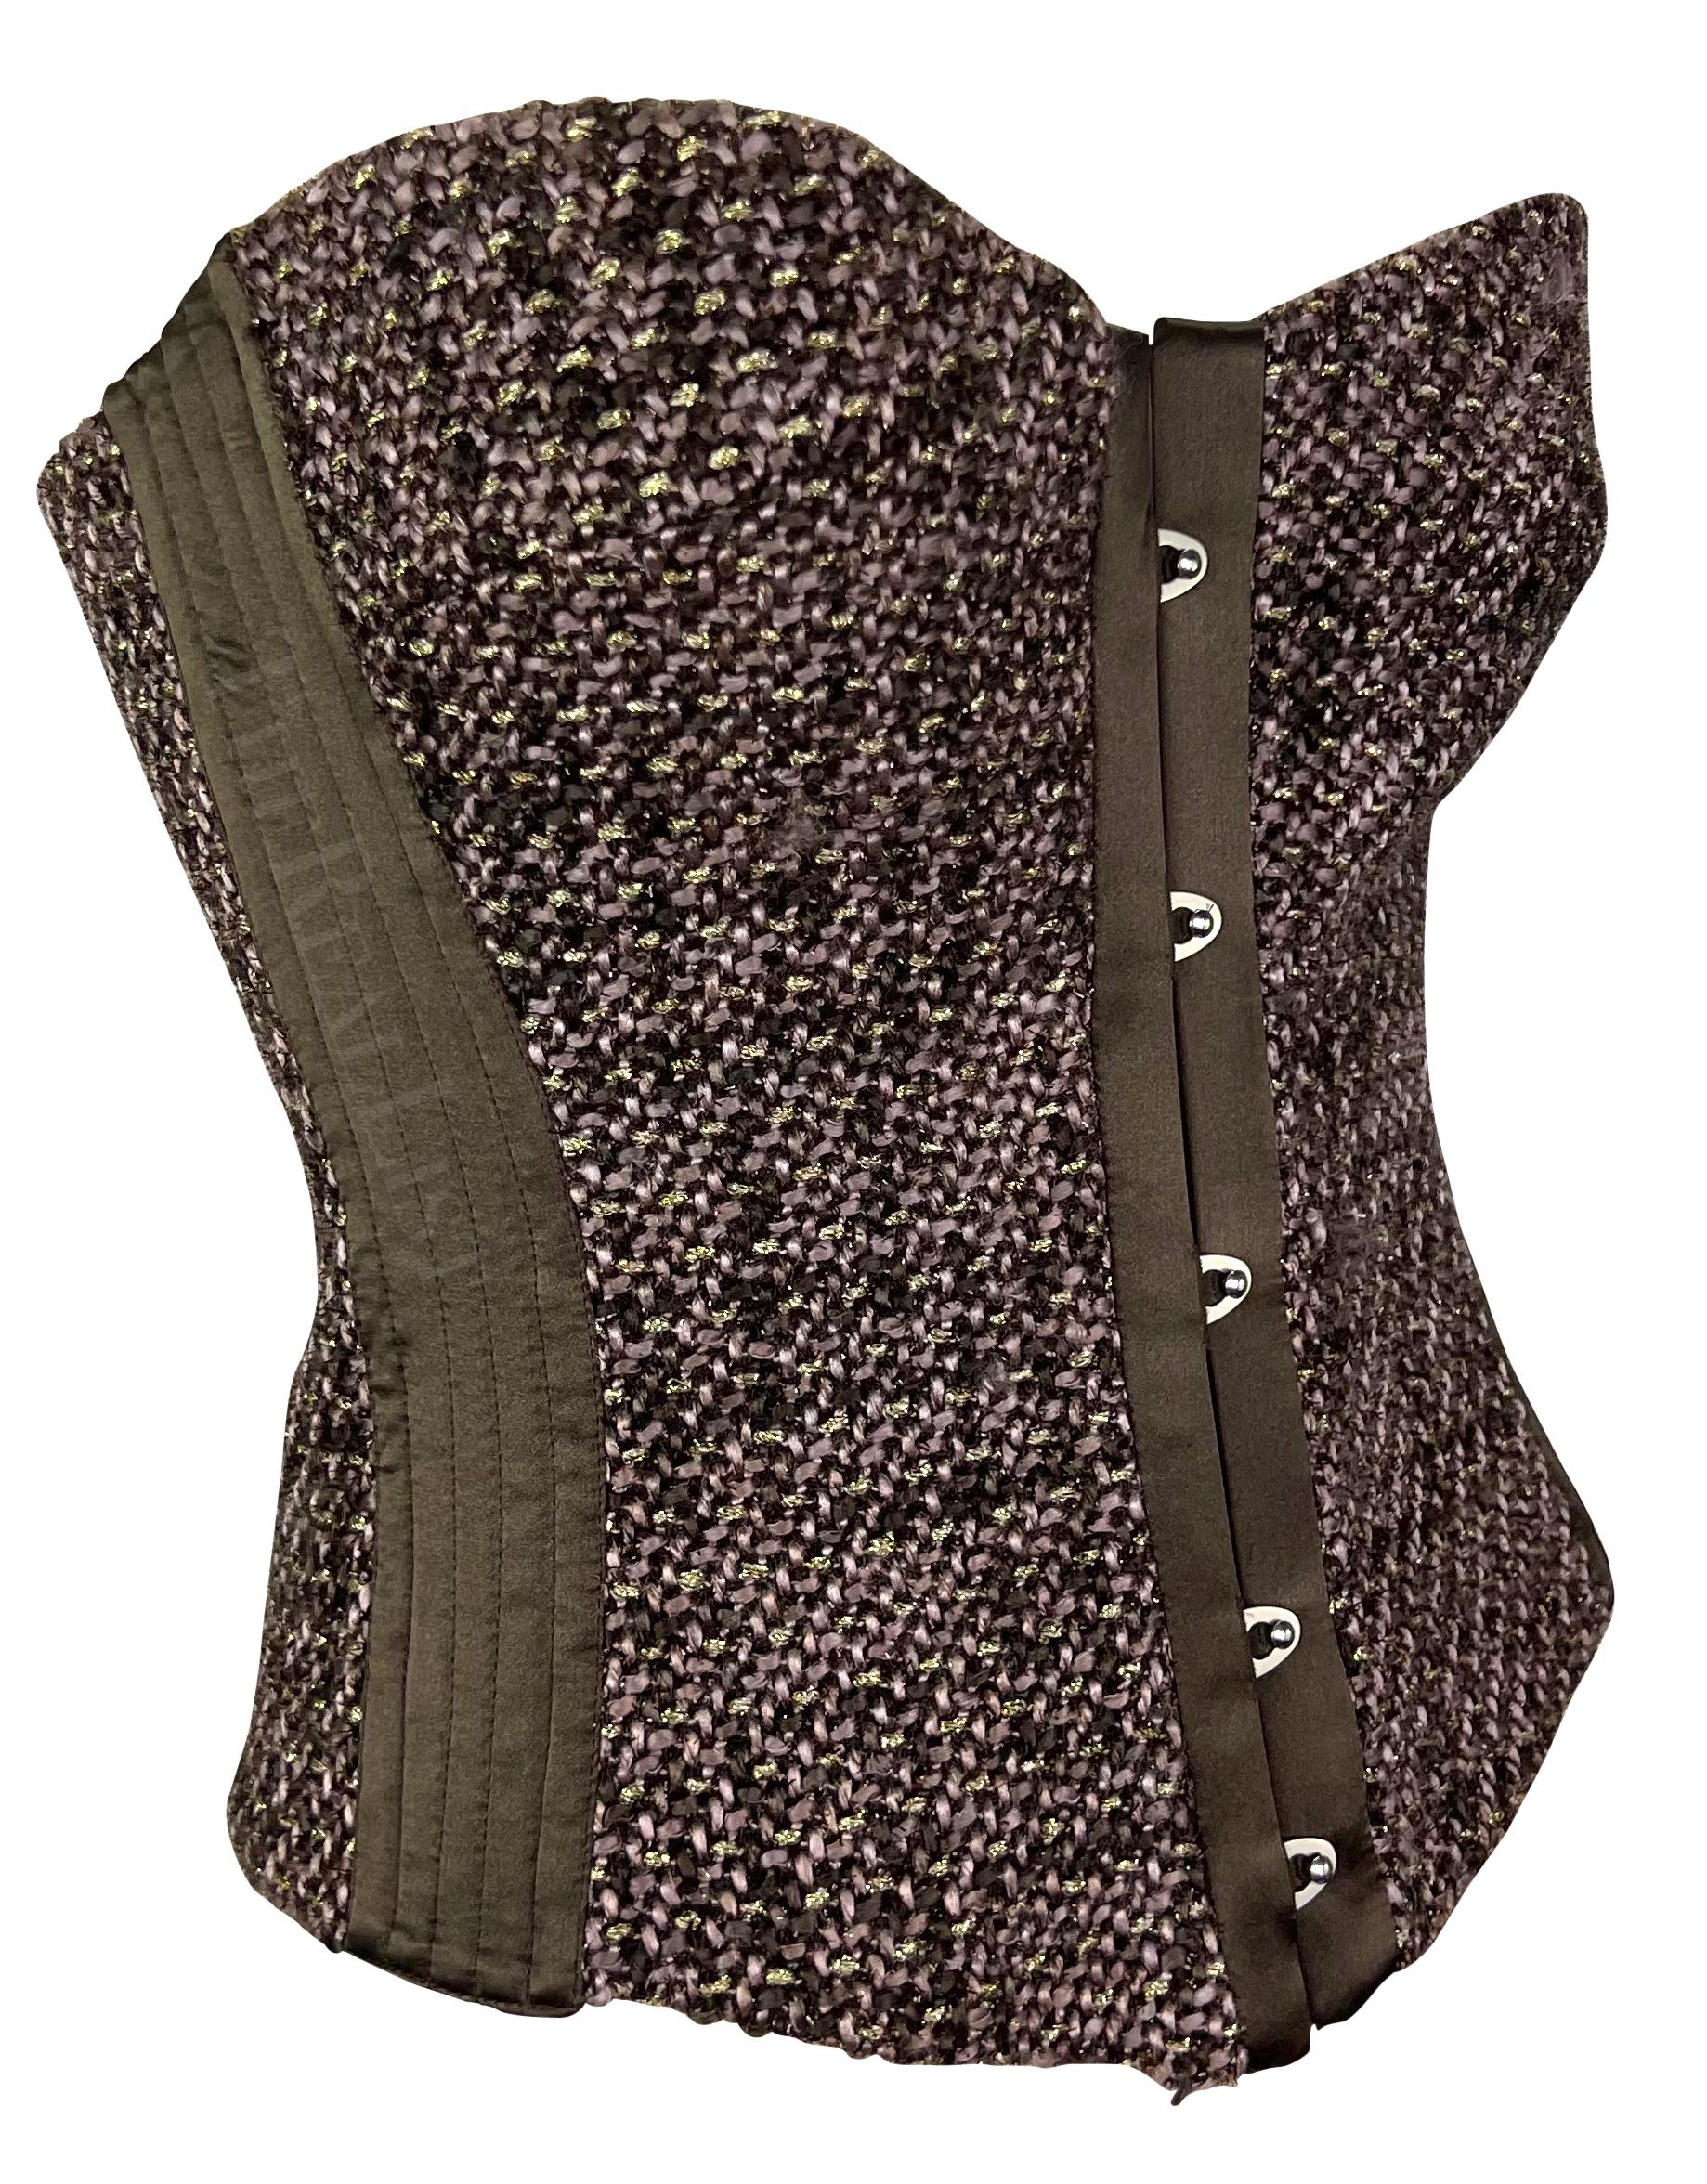 Presenting a brown tweed Roberto Cavalli tweed corset top. From the Fall/Winter 2005 collection, this top is constructed of gorgeous brown tweed, this steel-boned corset features a hook and eye closure at the front, and lace-up detail at the back.